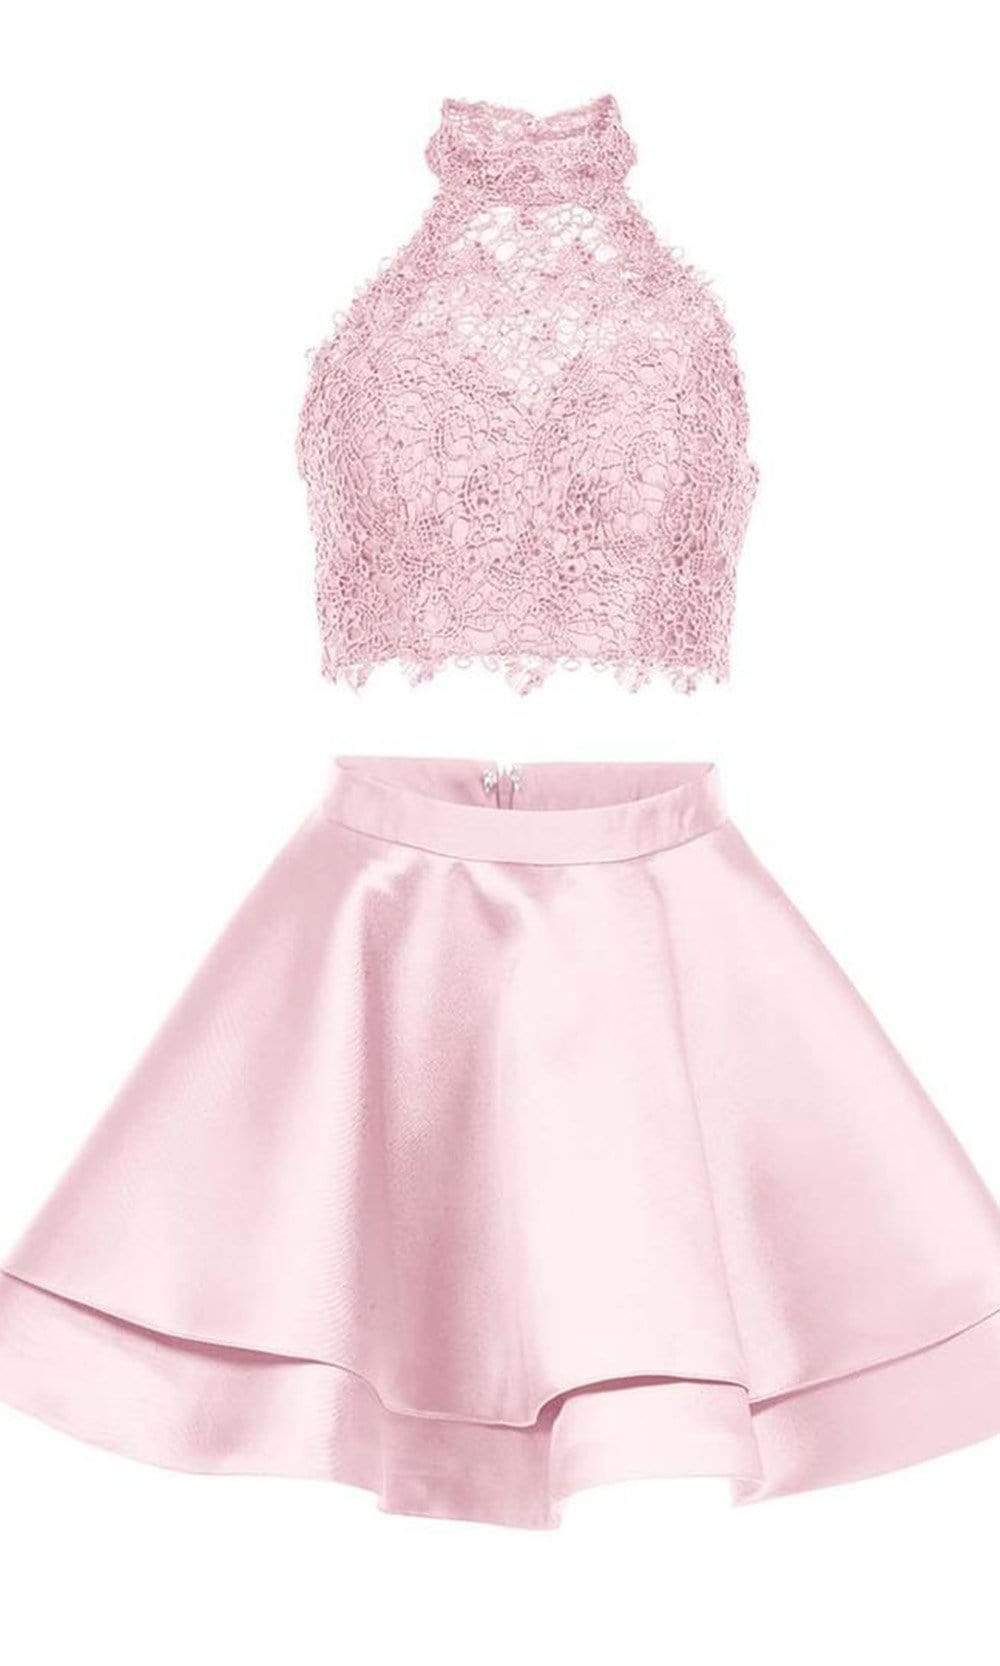 Alyce Paris - 3735 Two Piece Halter Lace Cocktail Dress Special Occasion Dress 000 / Blush Pink